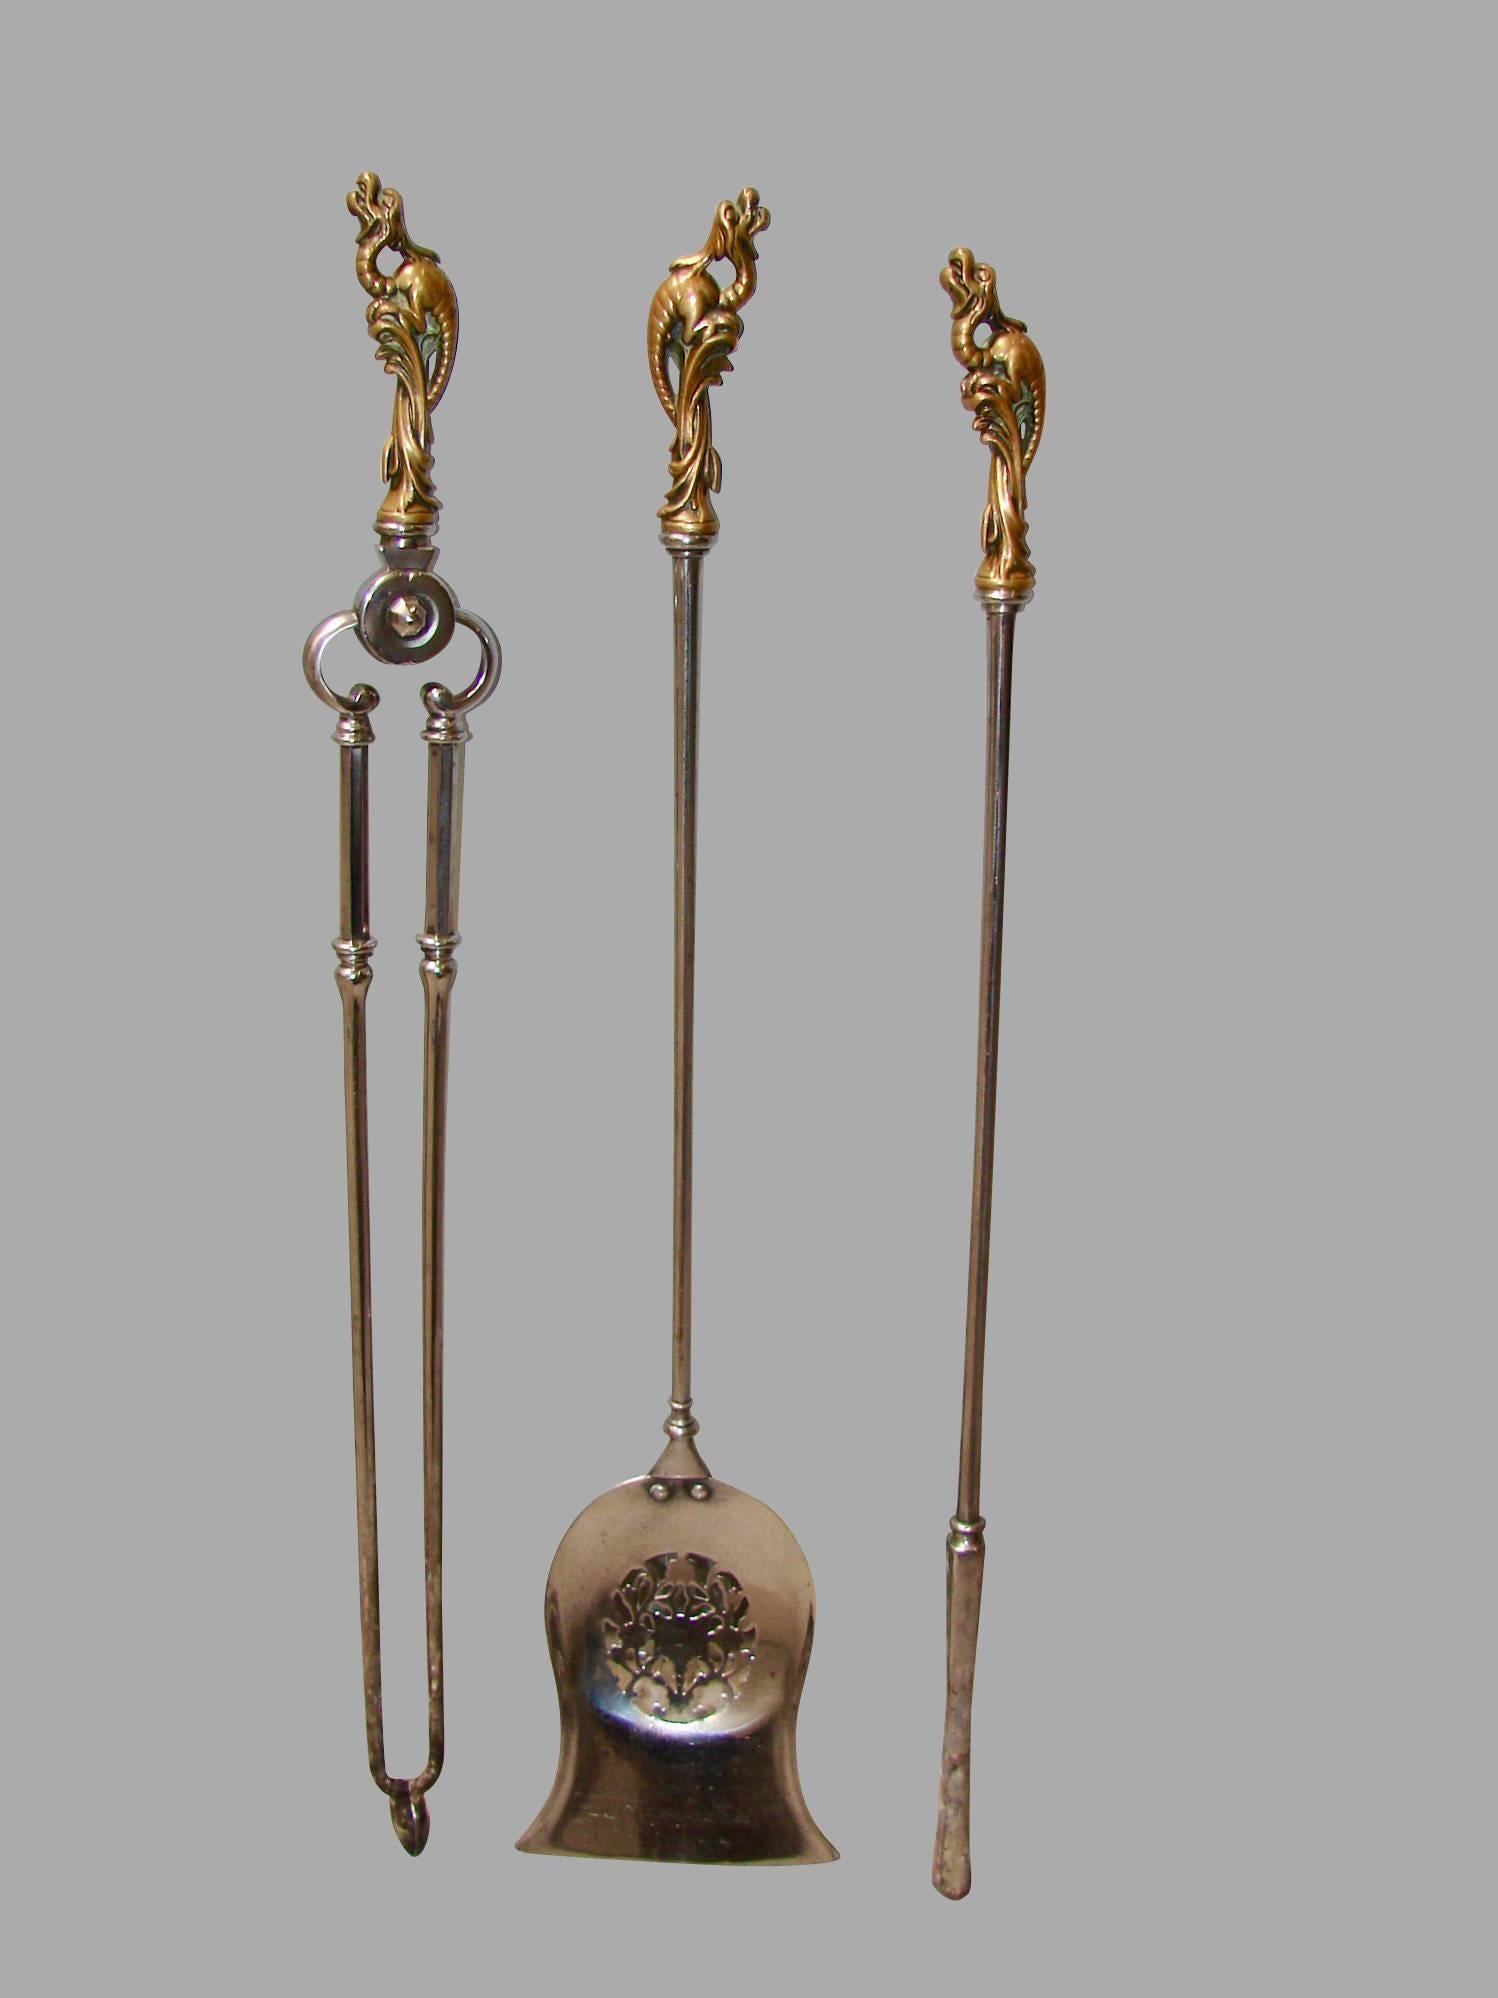 A fine quality set of English polished steel bronze handled fire tools of large size consisting of a poker, shovel and tongs, each tool with a fanciful bronze handle in the form of a mythological creature, circa 1840.